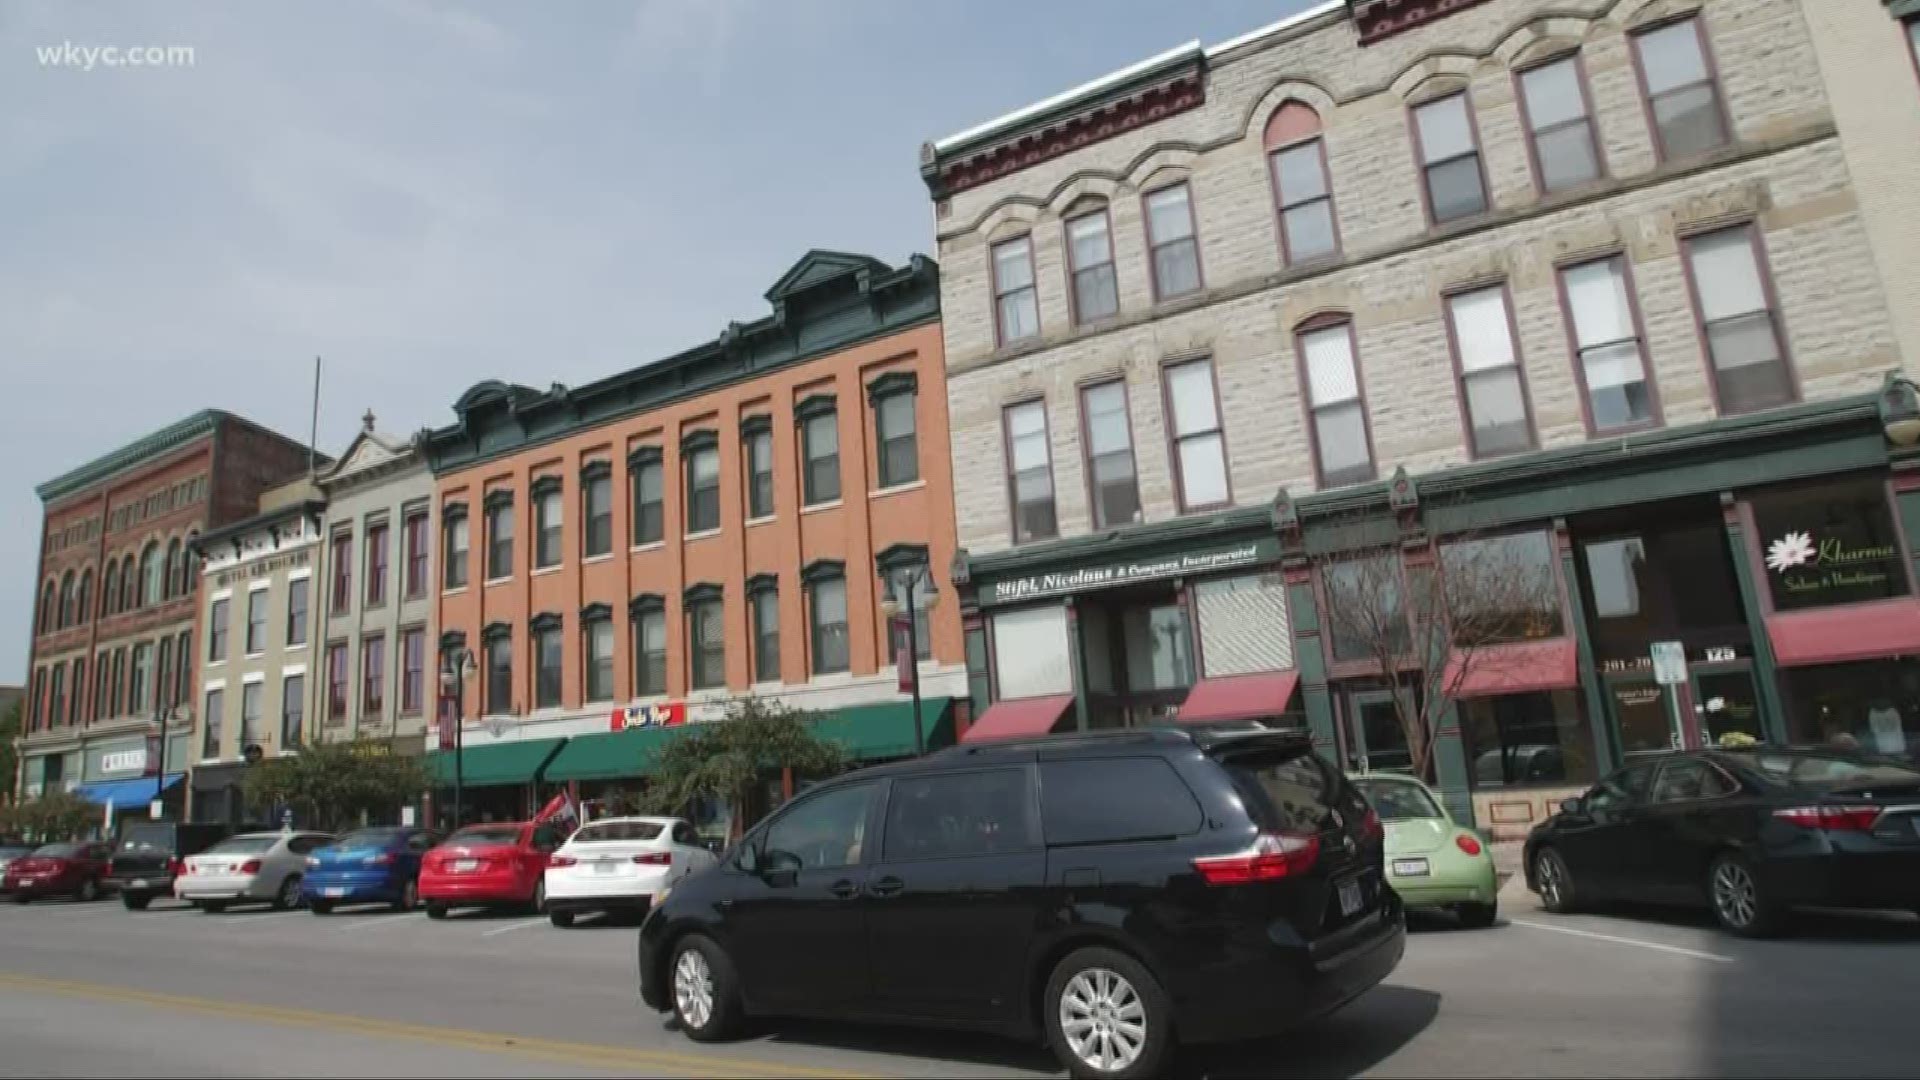 Jay visits his hometown of Sandusky and tells us his three favorite spots in the area.